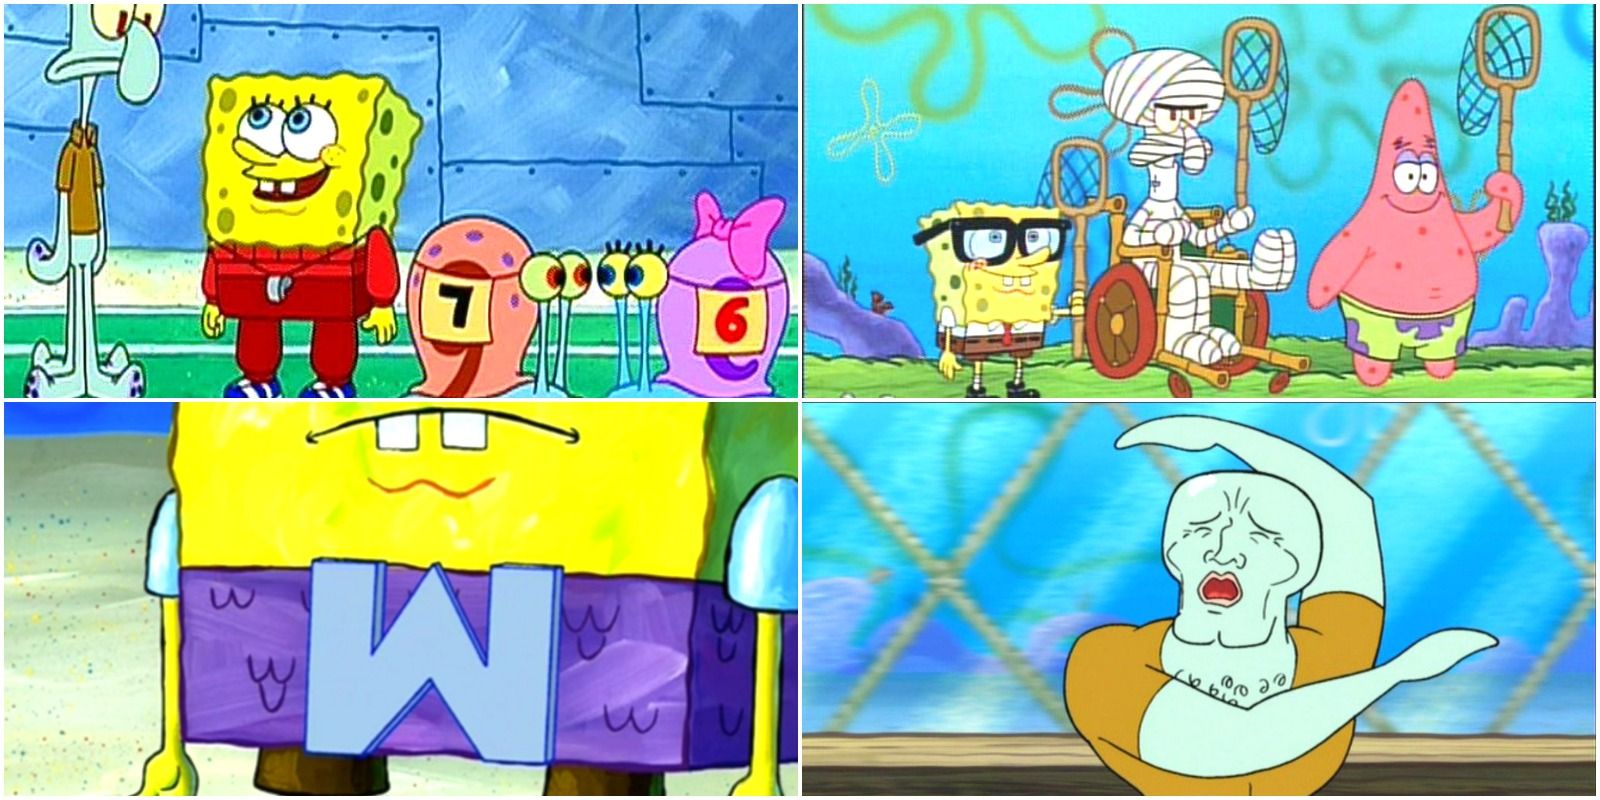 Handsome Squidward, Wumbo Belt, Jellyfishing, and Snail Racing from the SpongeBob show